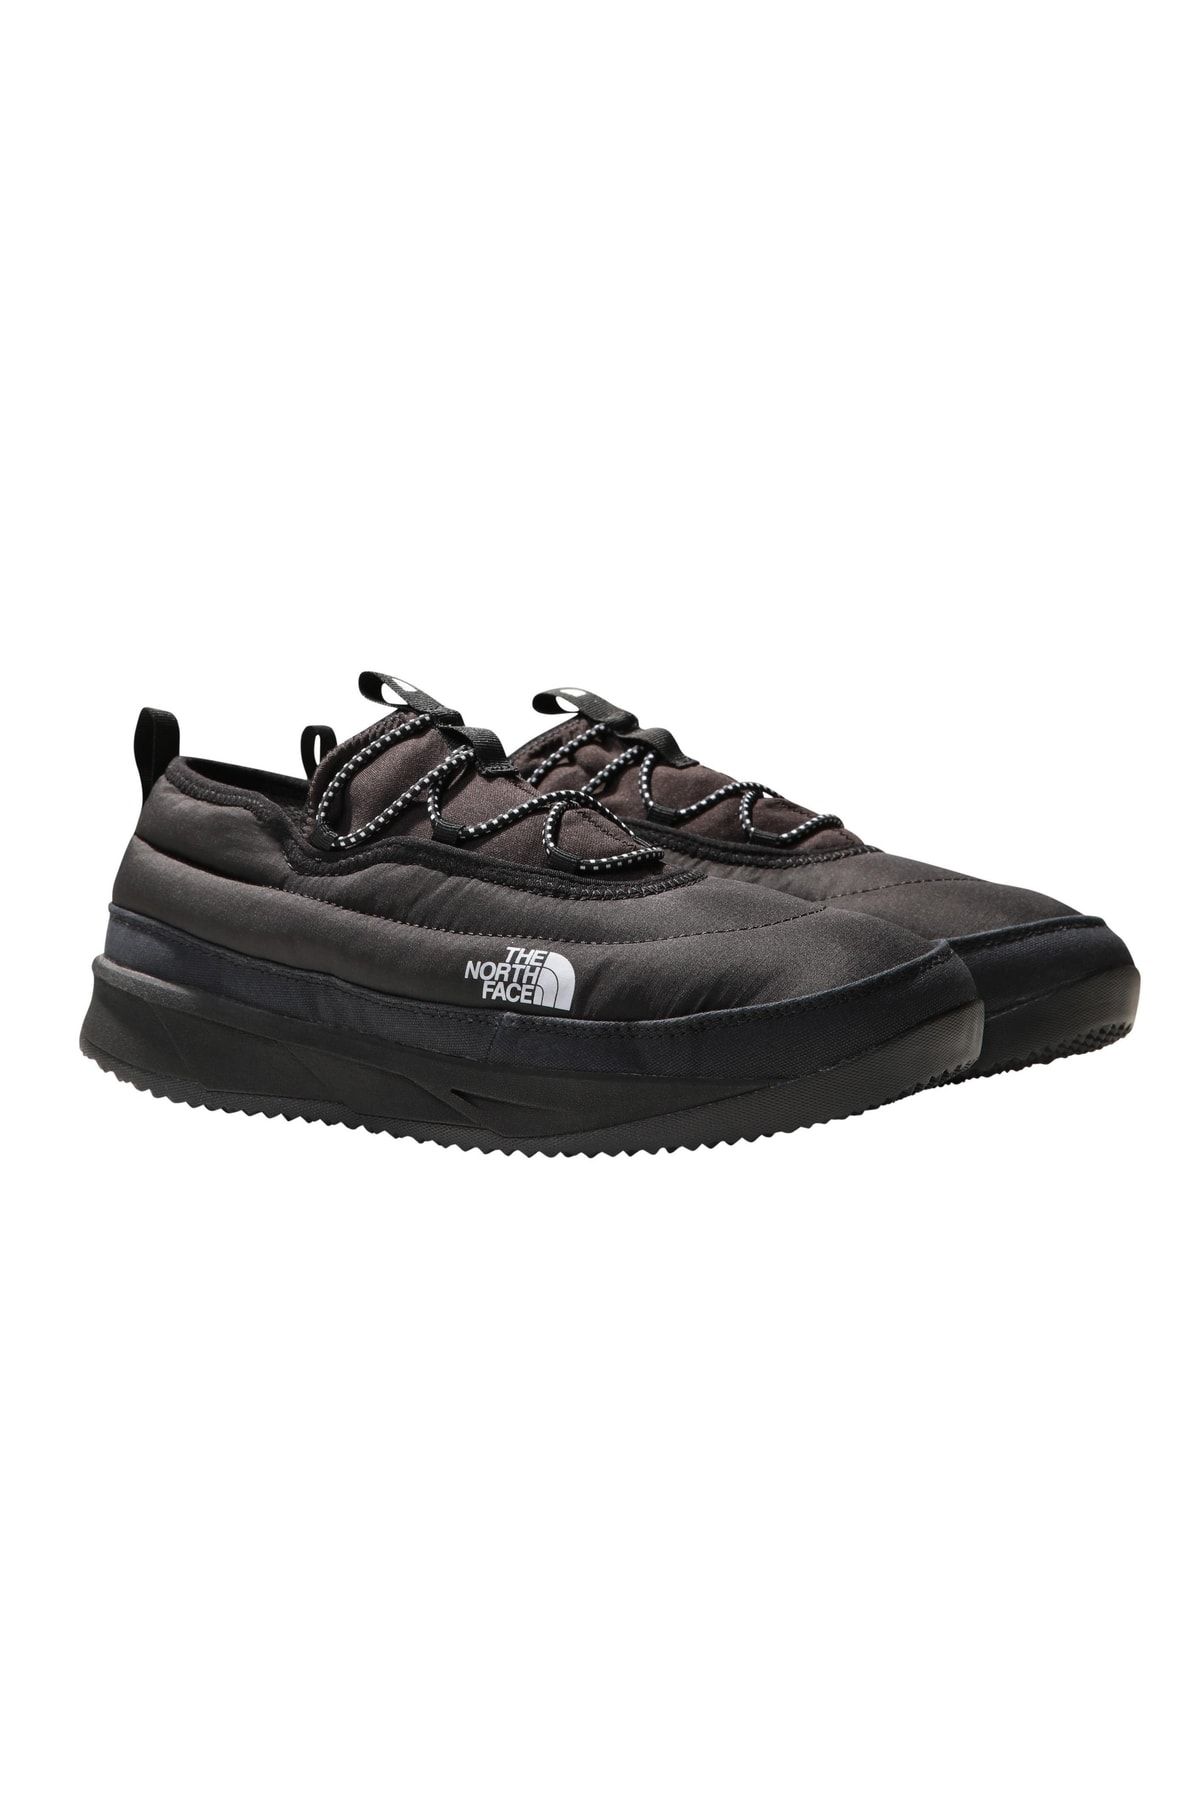 The North Face M Nse Low Nf0a7w4pkx71